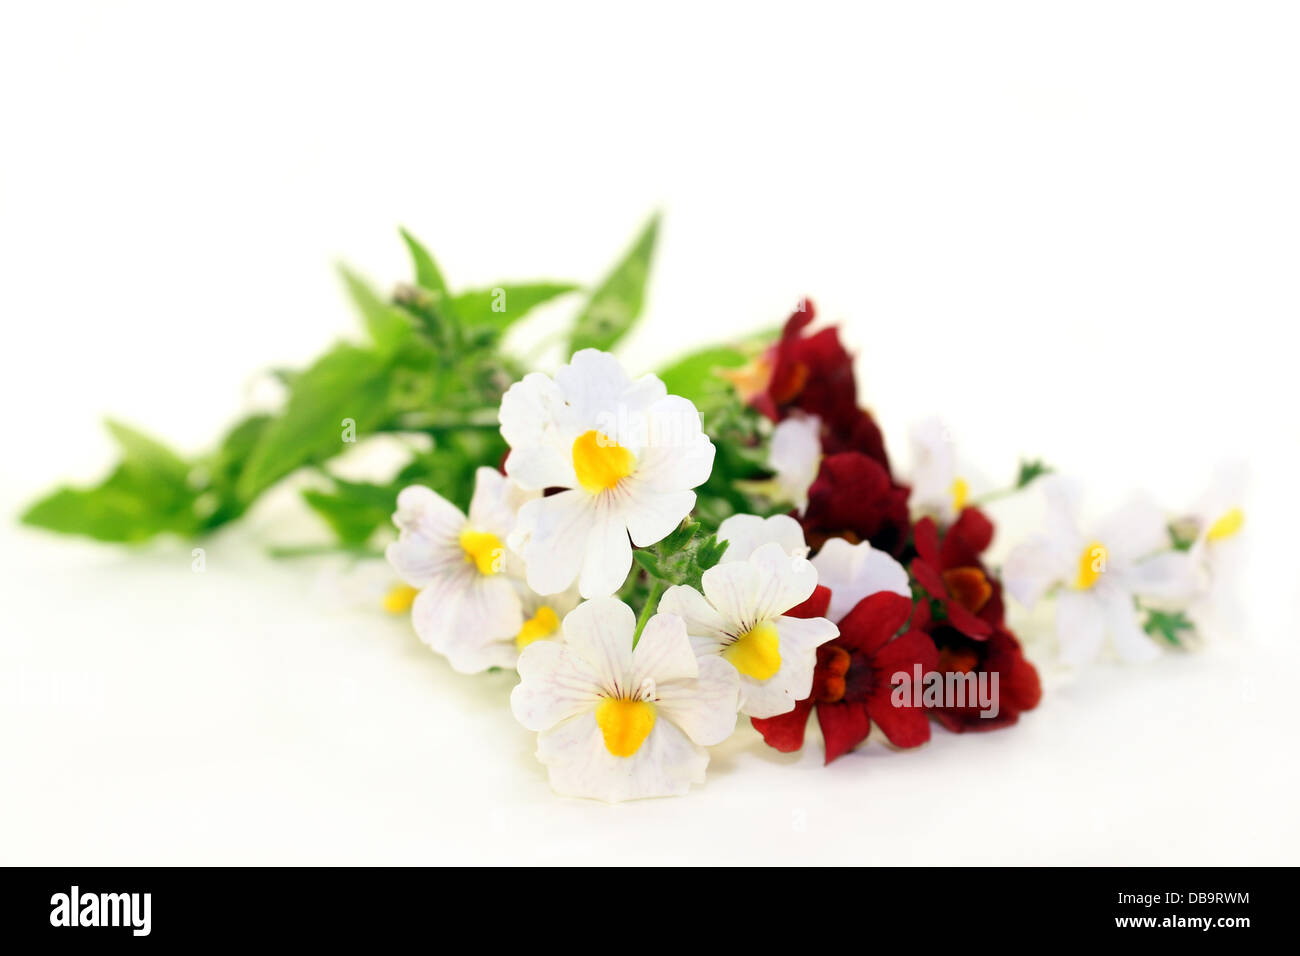 nemesia flower and leaves against a white background Stock Photo